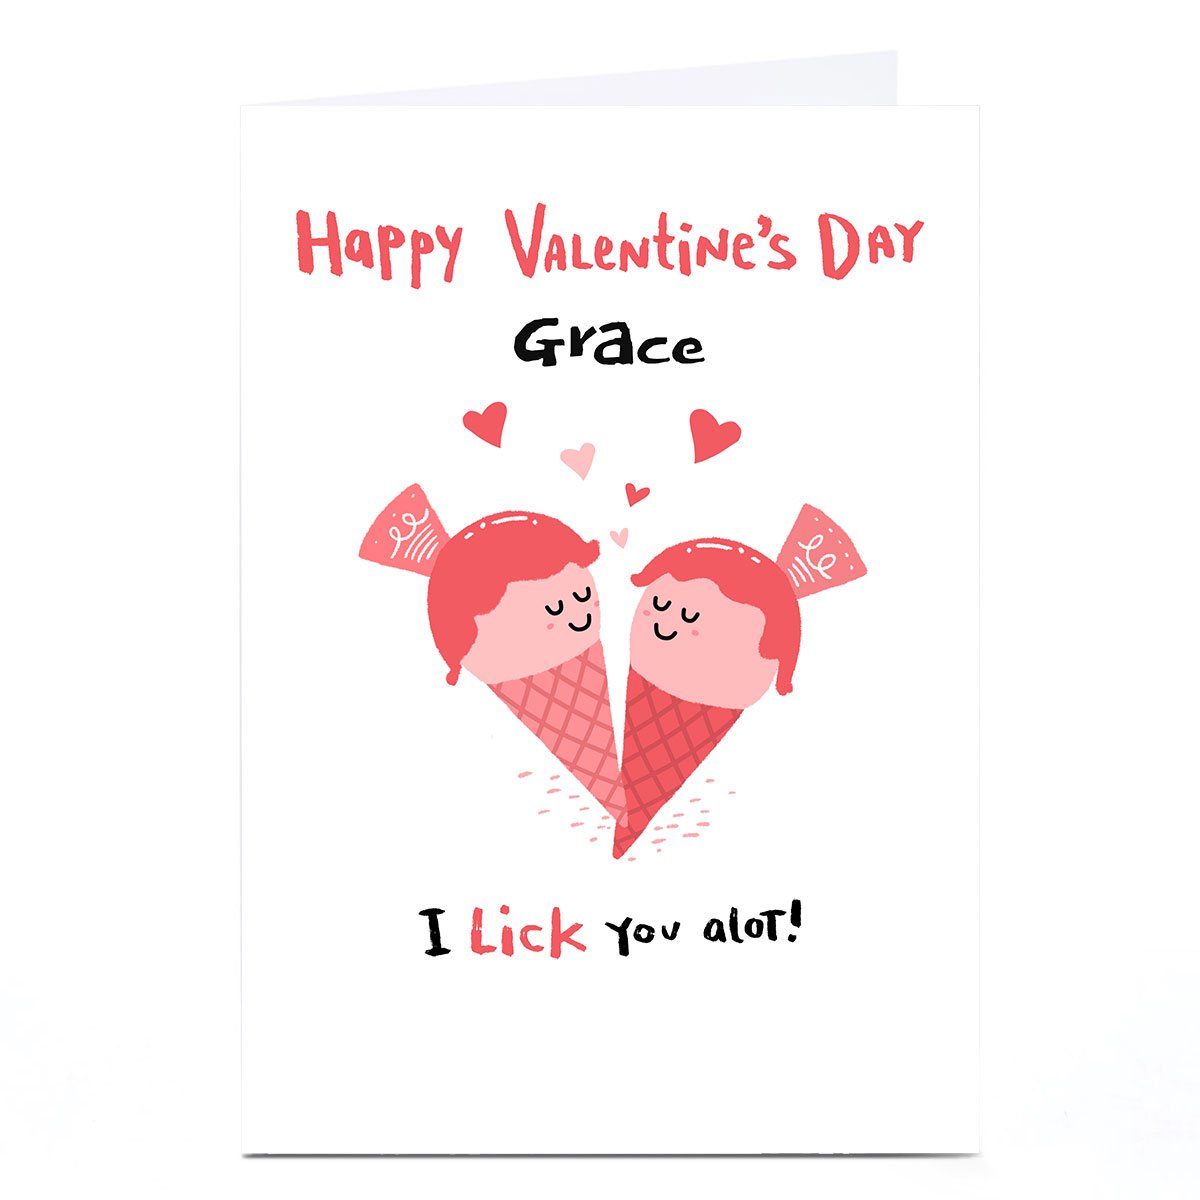 Personalised Hew Ma Valentine's Day Card - Lick You A Lot